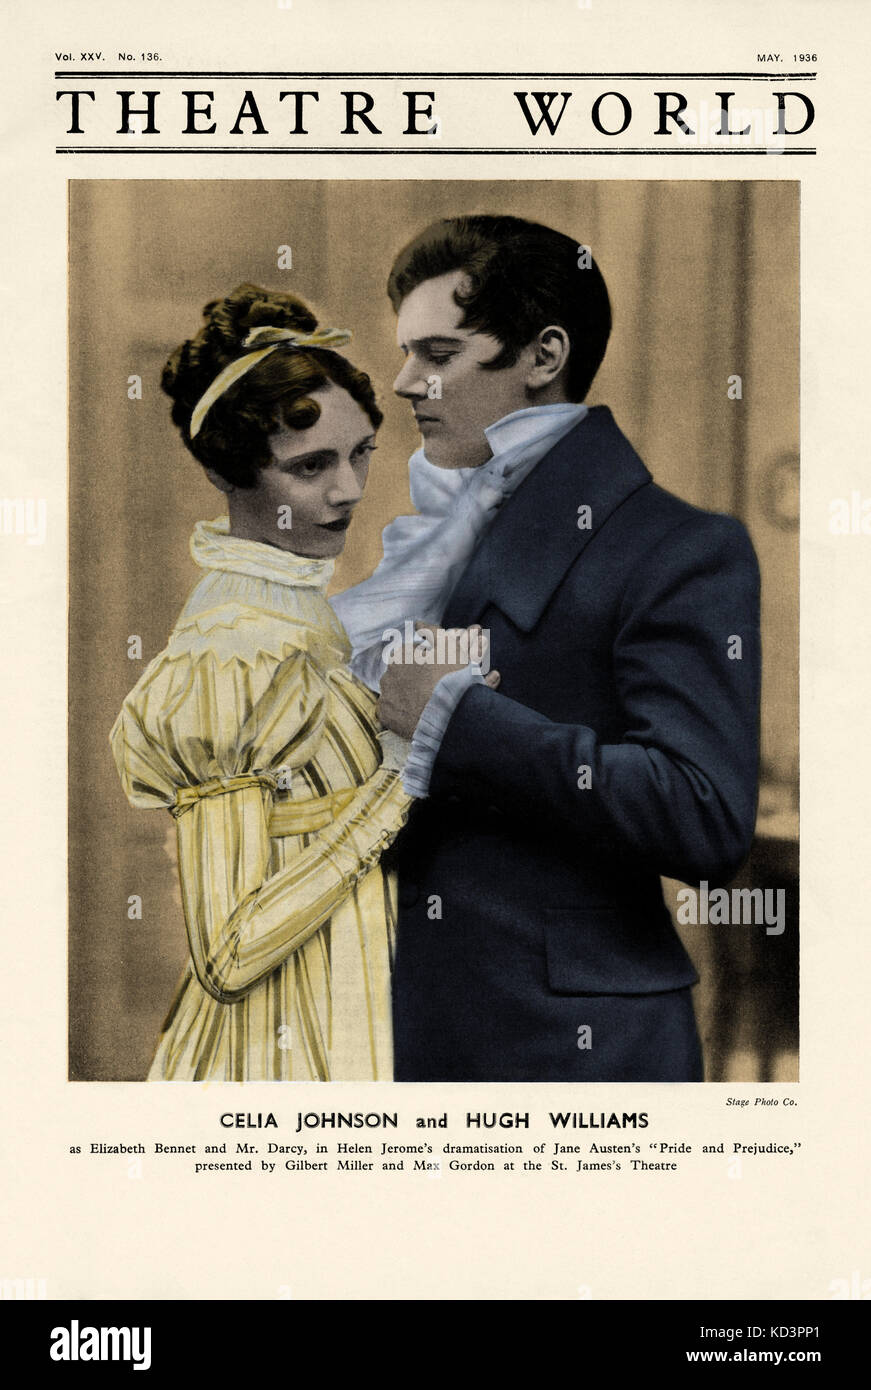 Celia Johnson as 'Elizabeth Bennet' & Hugh Williams as 'Mr. Darcy' in Helen Jerome 's dramatisation of Jane Austen 's novel 'Pride and Prejudice'. Performed at the St. James's Theatre, London, 1936. CJ, English actress: 18 December 1908 - 26 April 1982. HW, English actor & dramatist: 6 March 1904 - 7 December 1969. Stock Photo